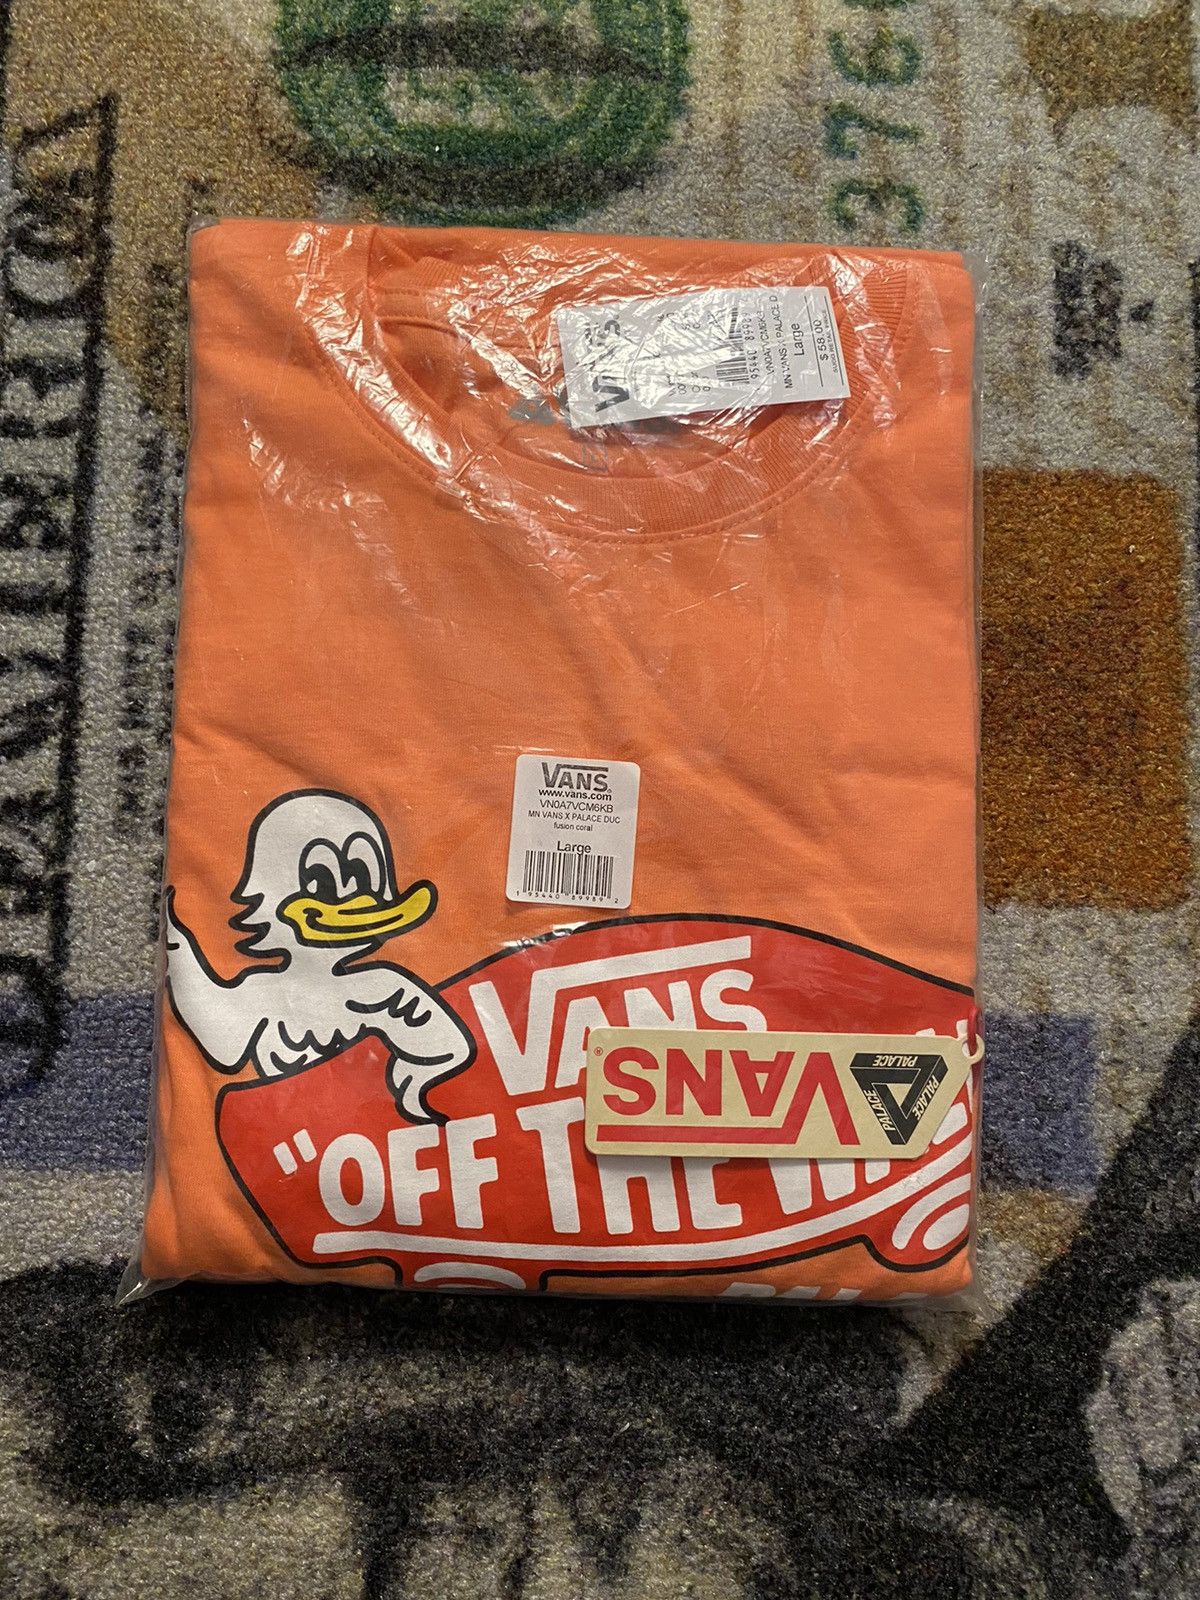 Palace PALACE VANS DUCK OUT LONGSLEEVE FUSION CORAL | Grailed